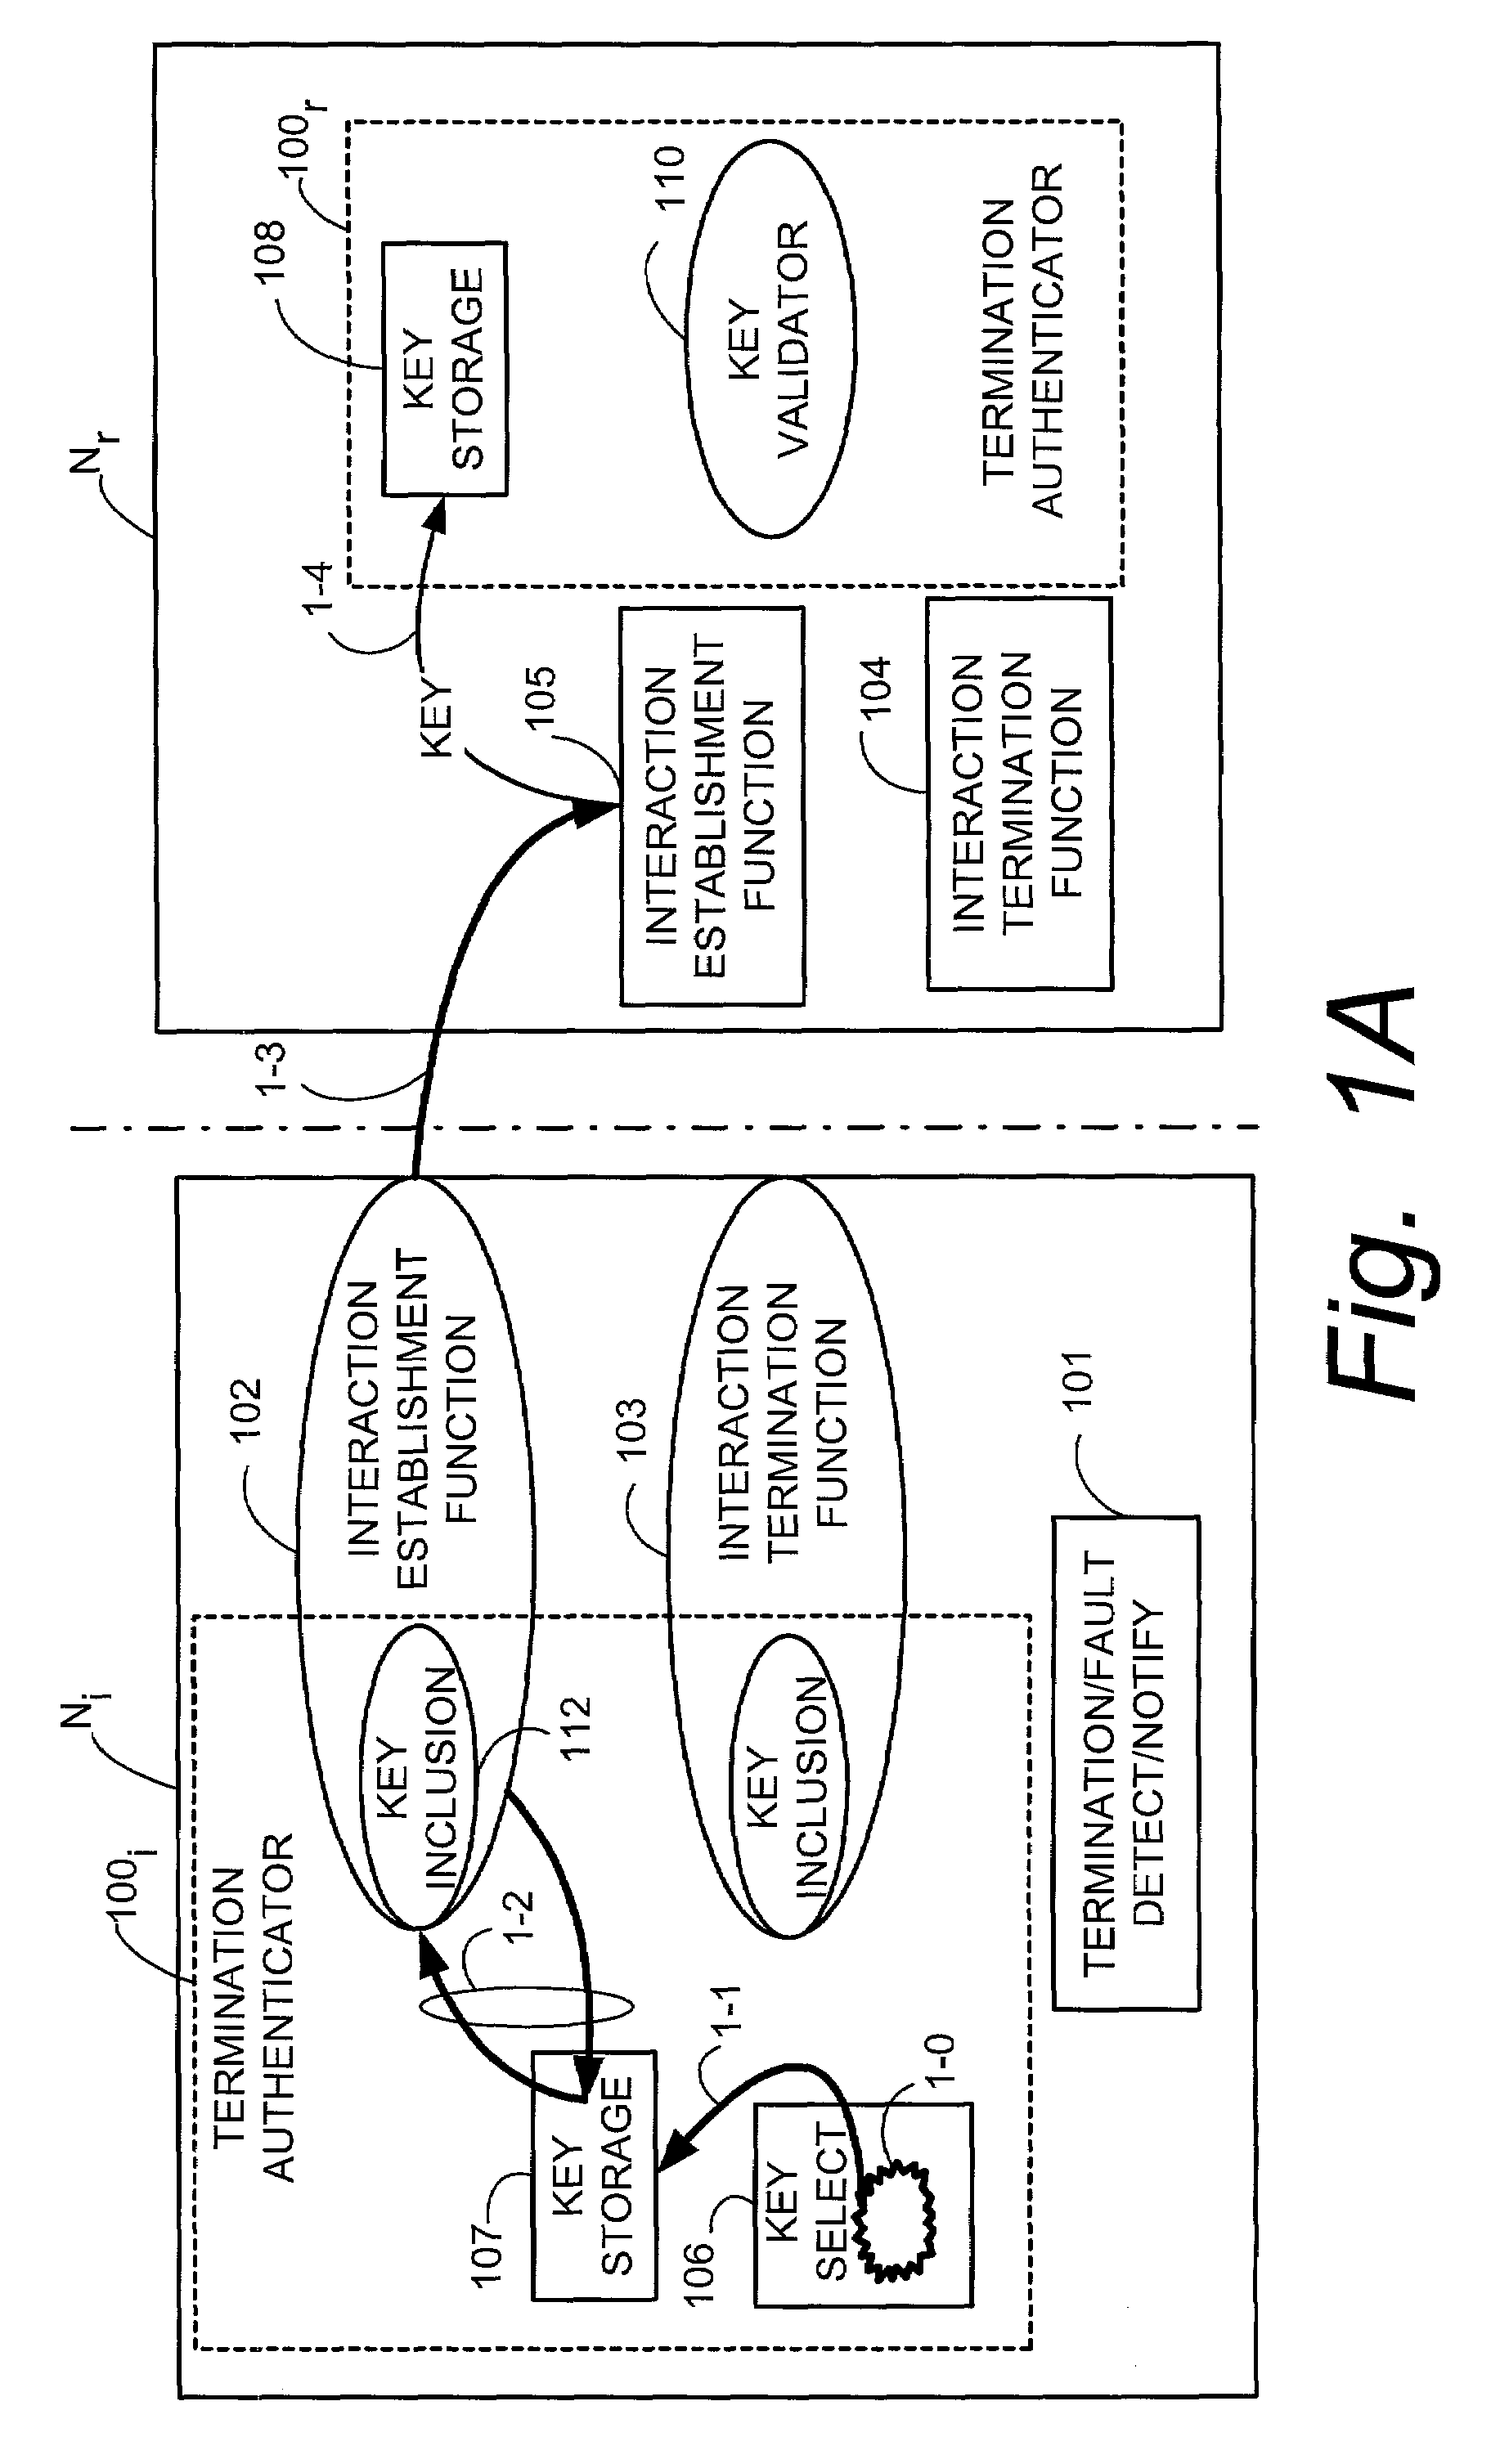 Authentication of termination messages in telecommunications system